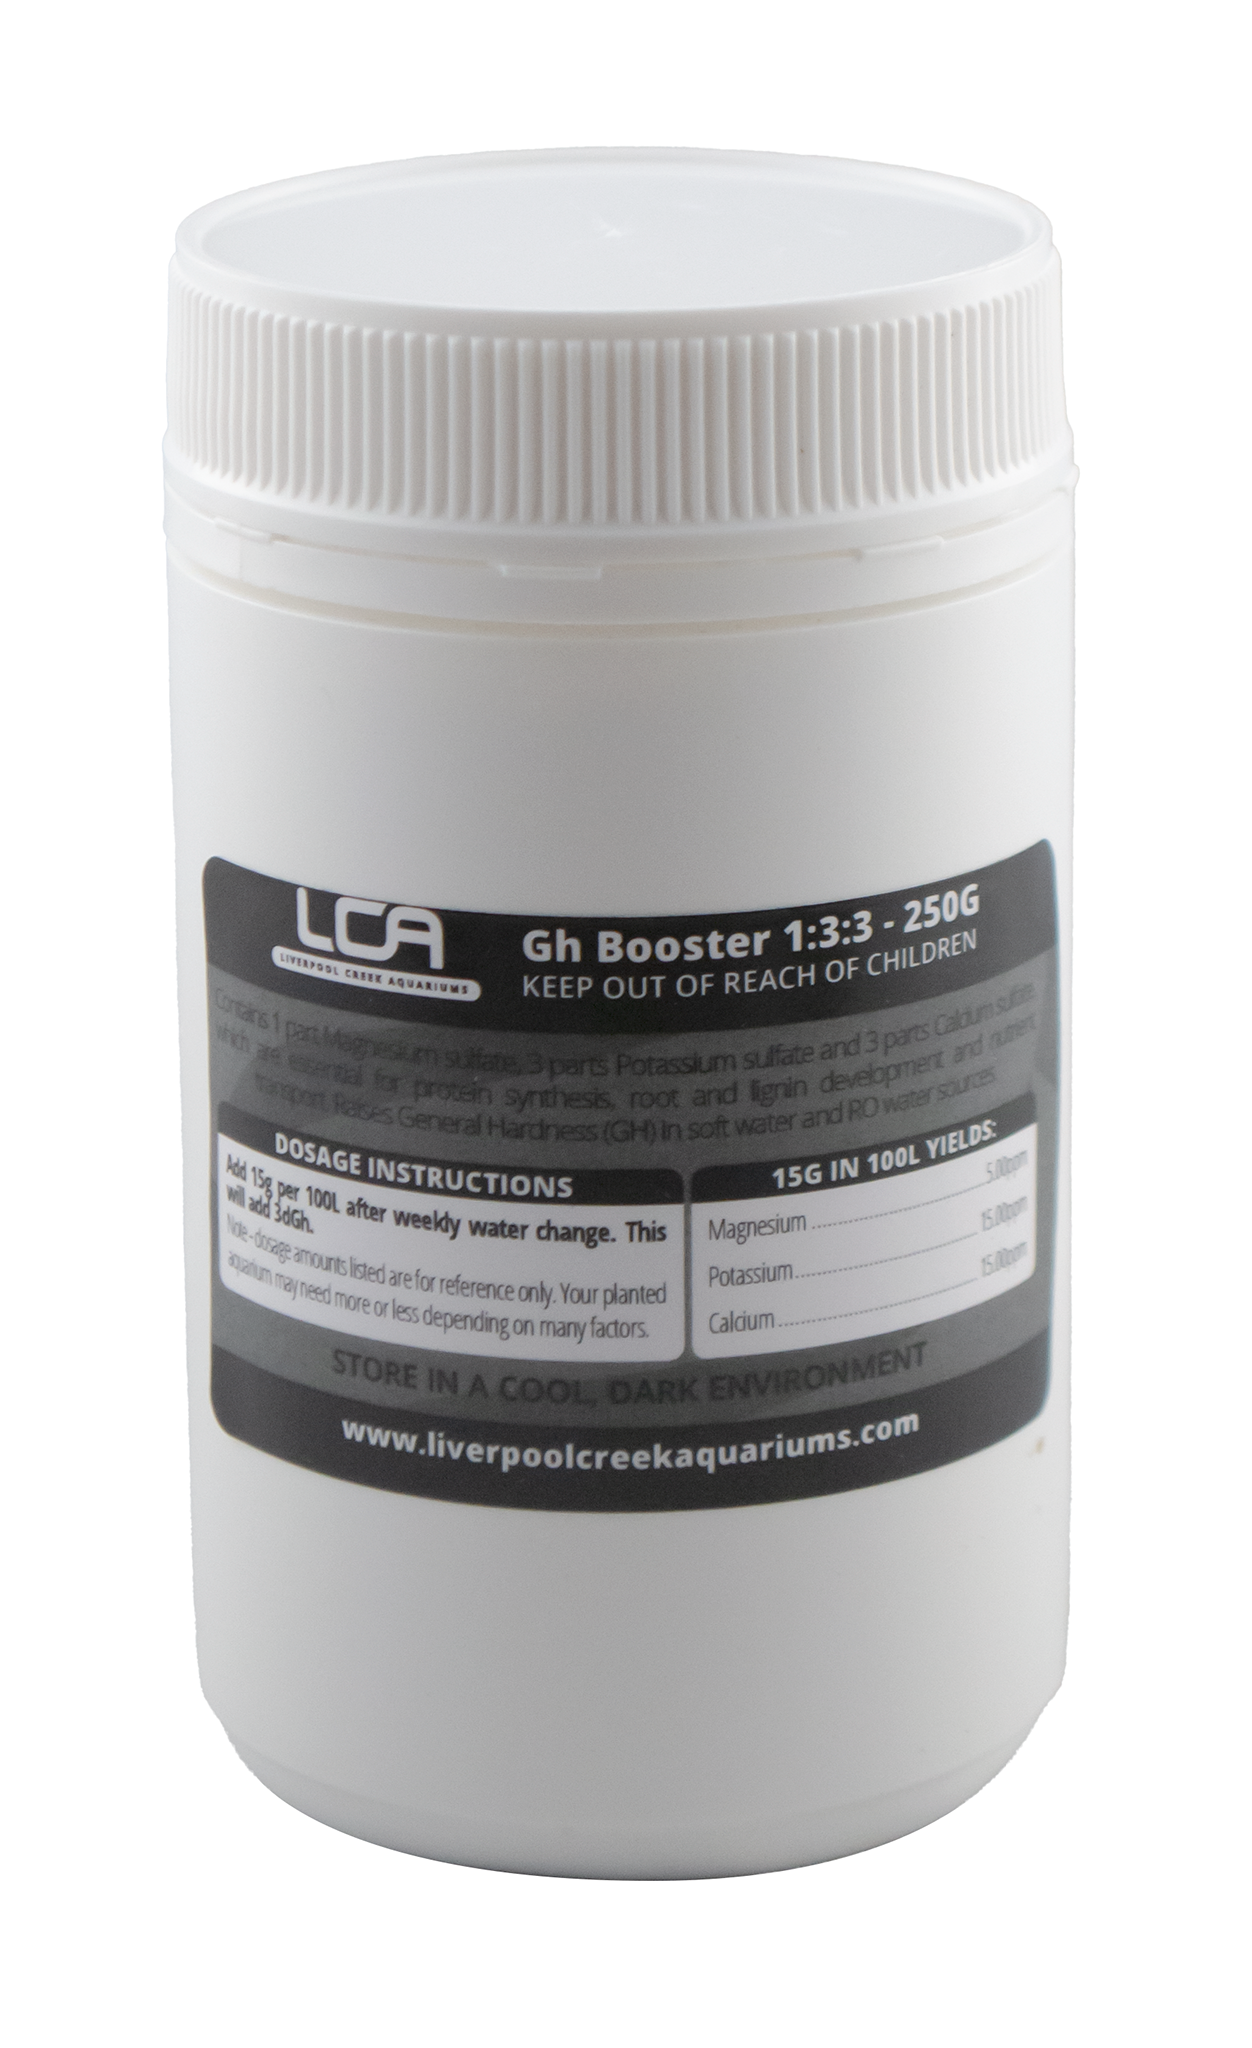 LCA GH Booster Dry